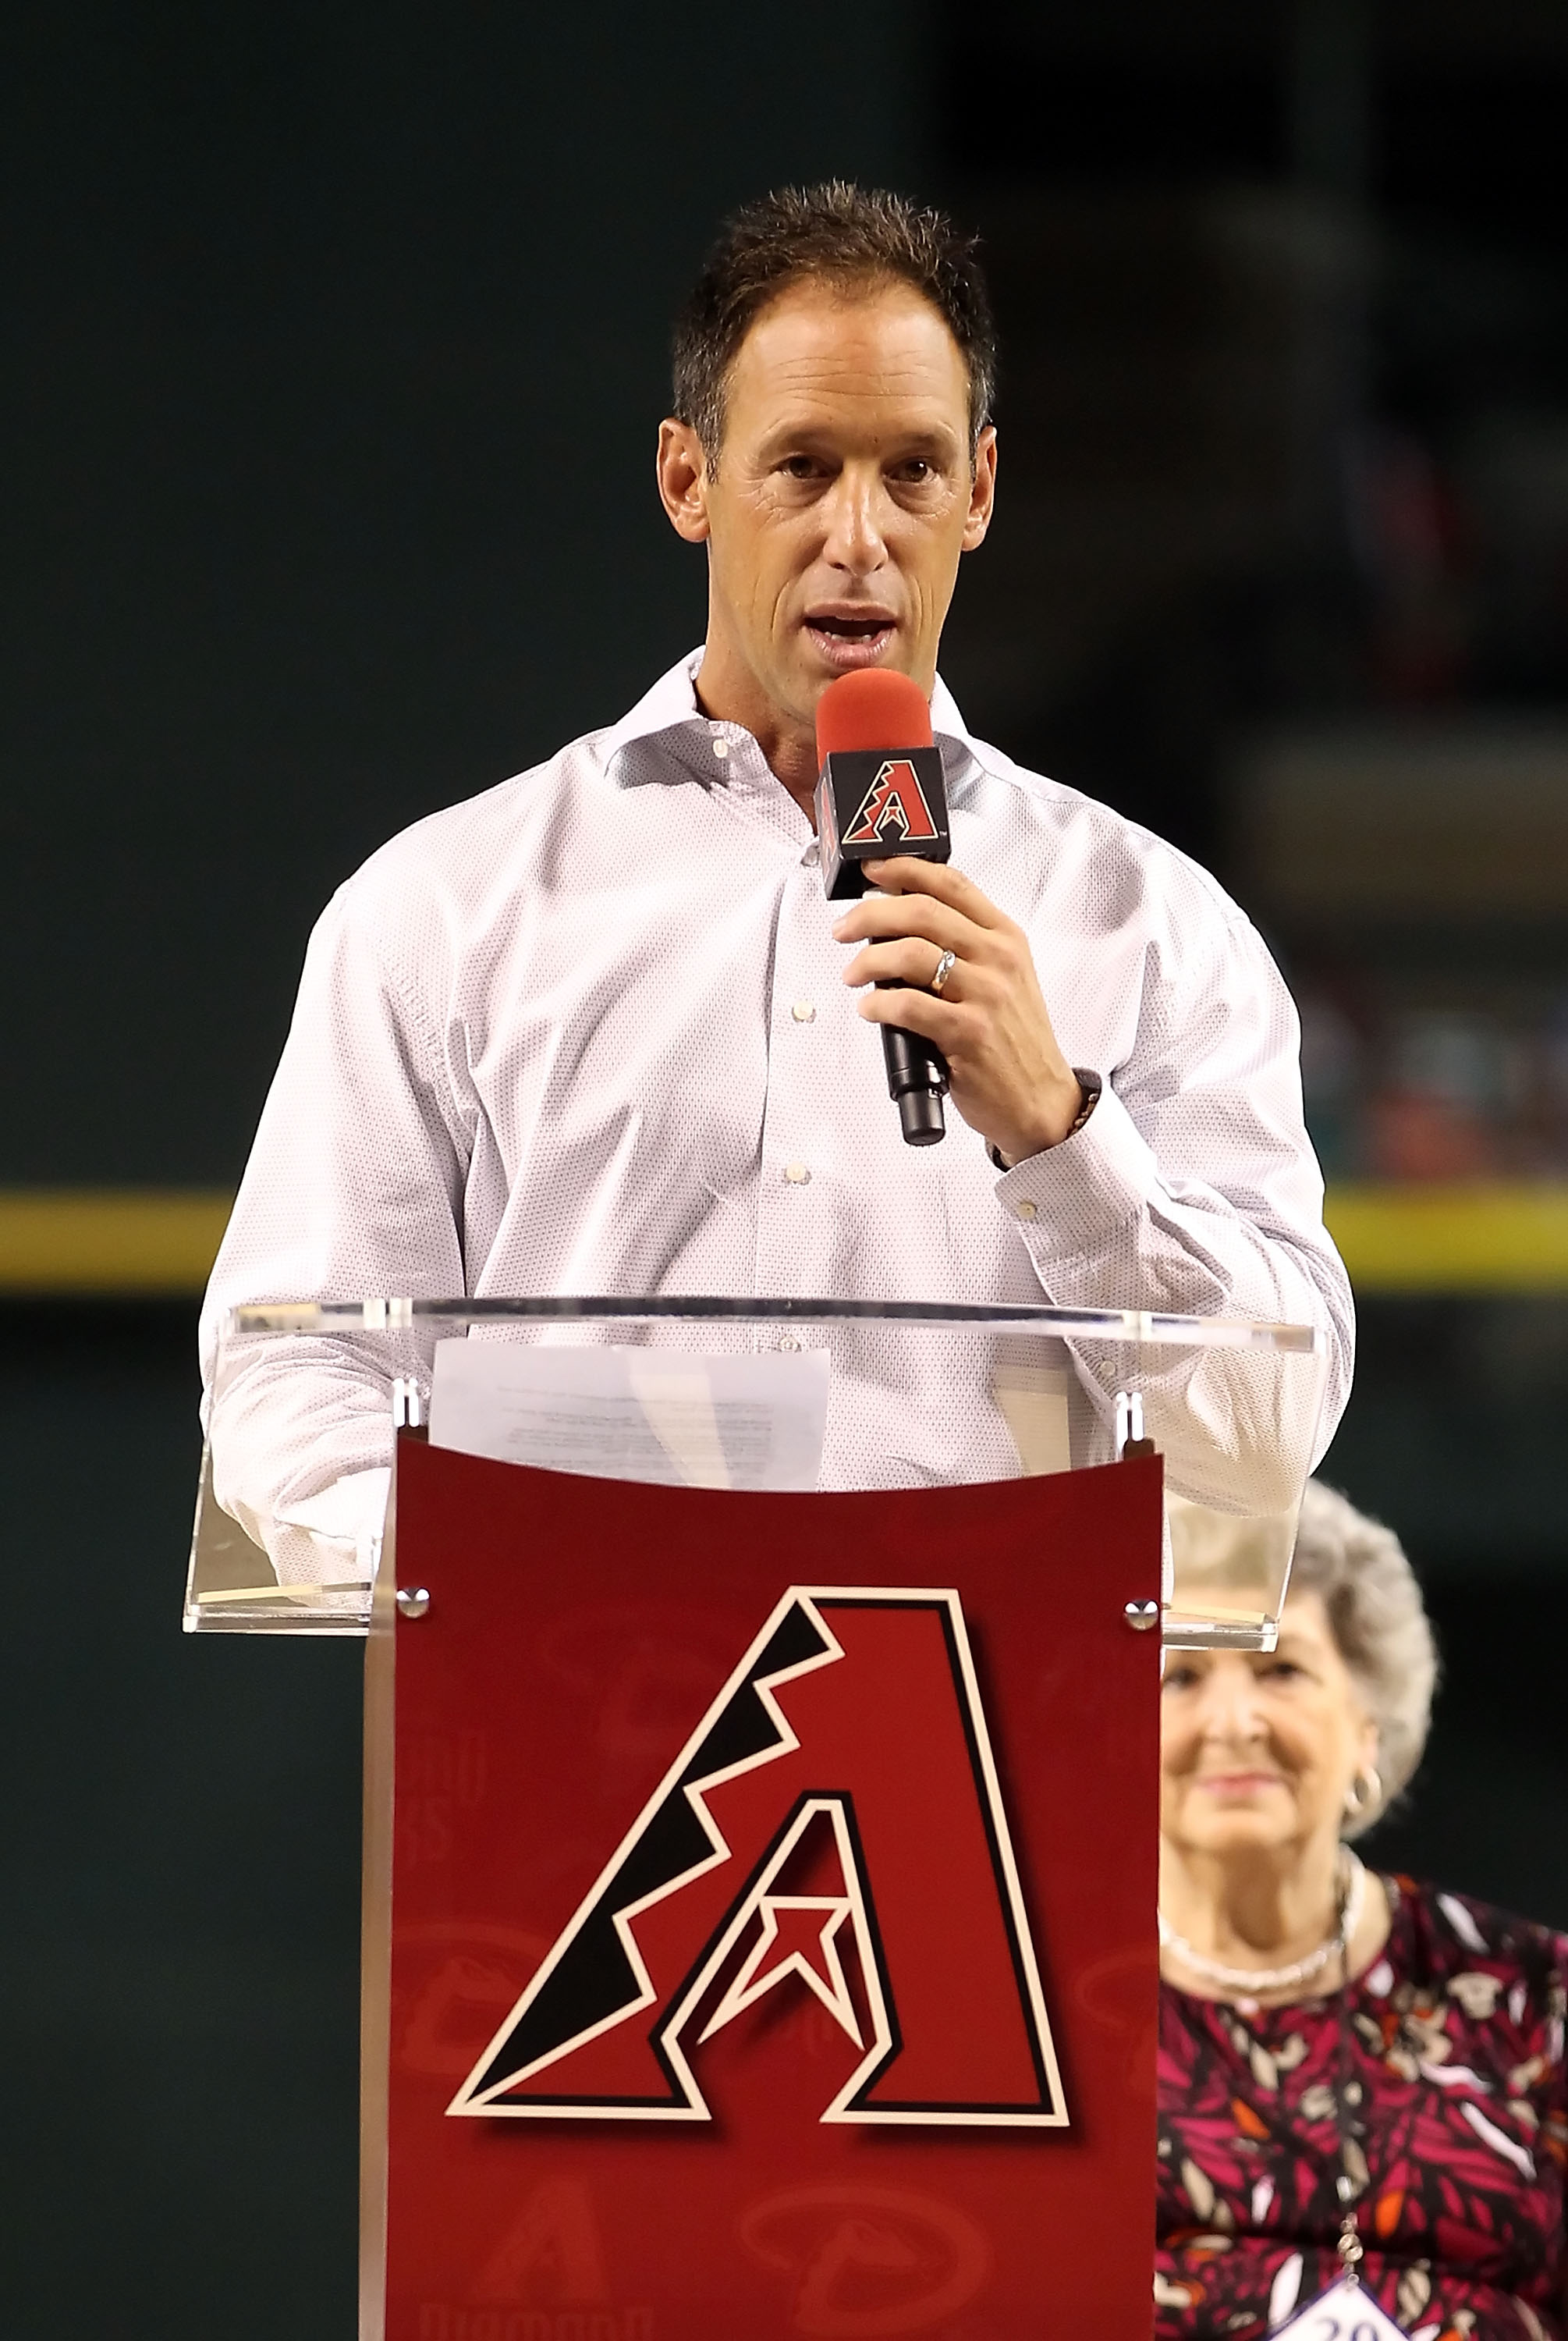 PHOENIX - AUGUST 07:  Luis Gonzalez speaks during his number retirement ceremony before the Major League Baseball game between the San Diego Padres and the Arizona Diamondbacks at Chase Field on August 7, 2010 in Phoenix, Arizona.  (Photo by Christian Pet